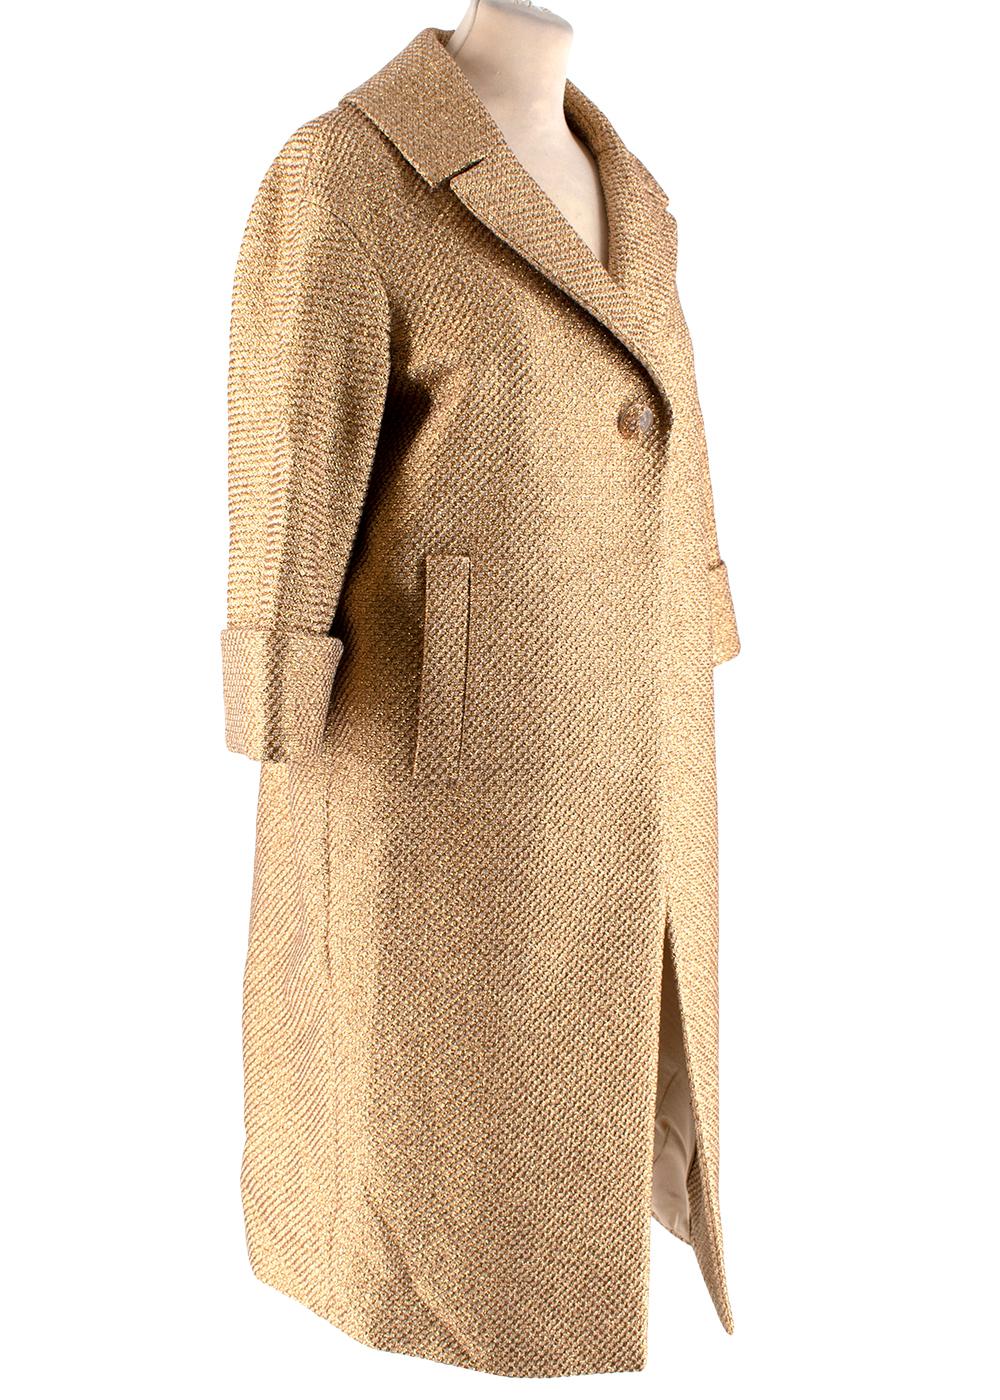 Louise Kennedy Rosie Gold Lurex Coat

- Unique Gold Detailing 
- Embellished Gold Buttons
- Double Cuff Detail
- Oversized Collar 
- x2 Outer Pockets 

Made in Portugal 

Chest - 48cm
Length - 94cm
Sleeve - 37cm